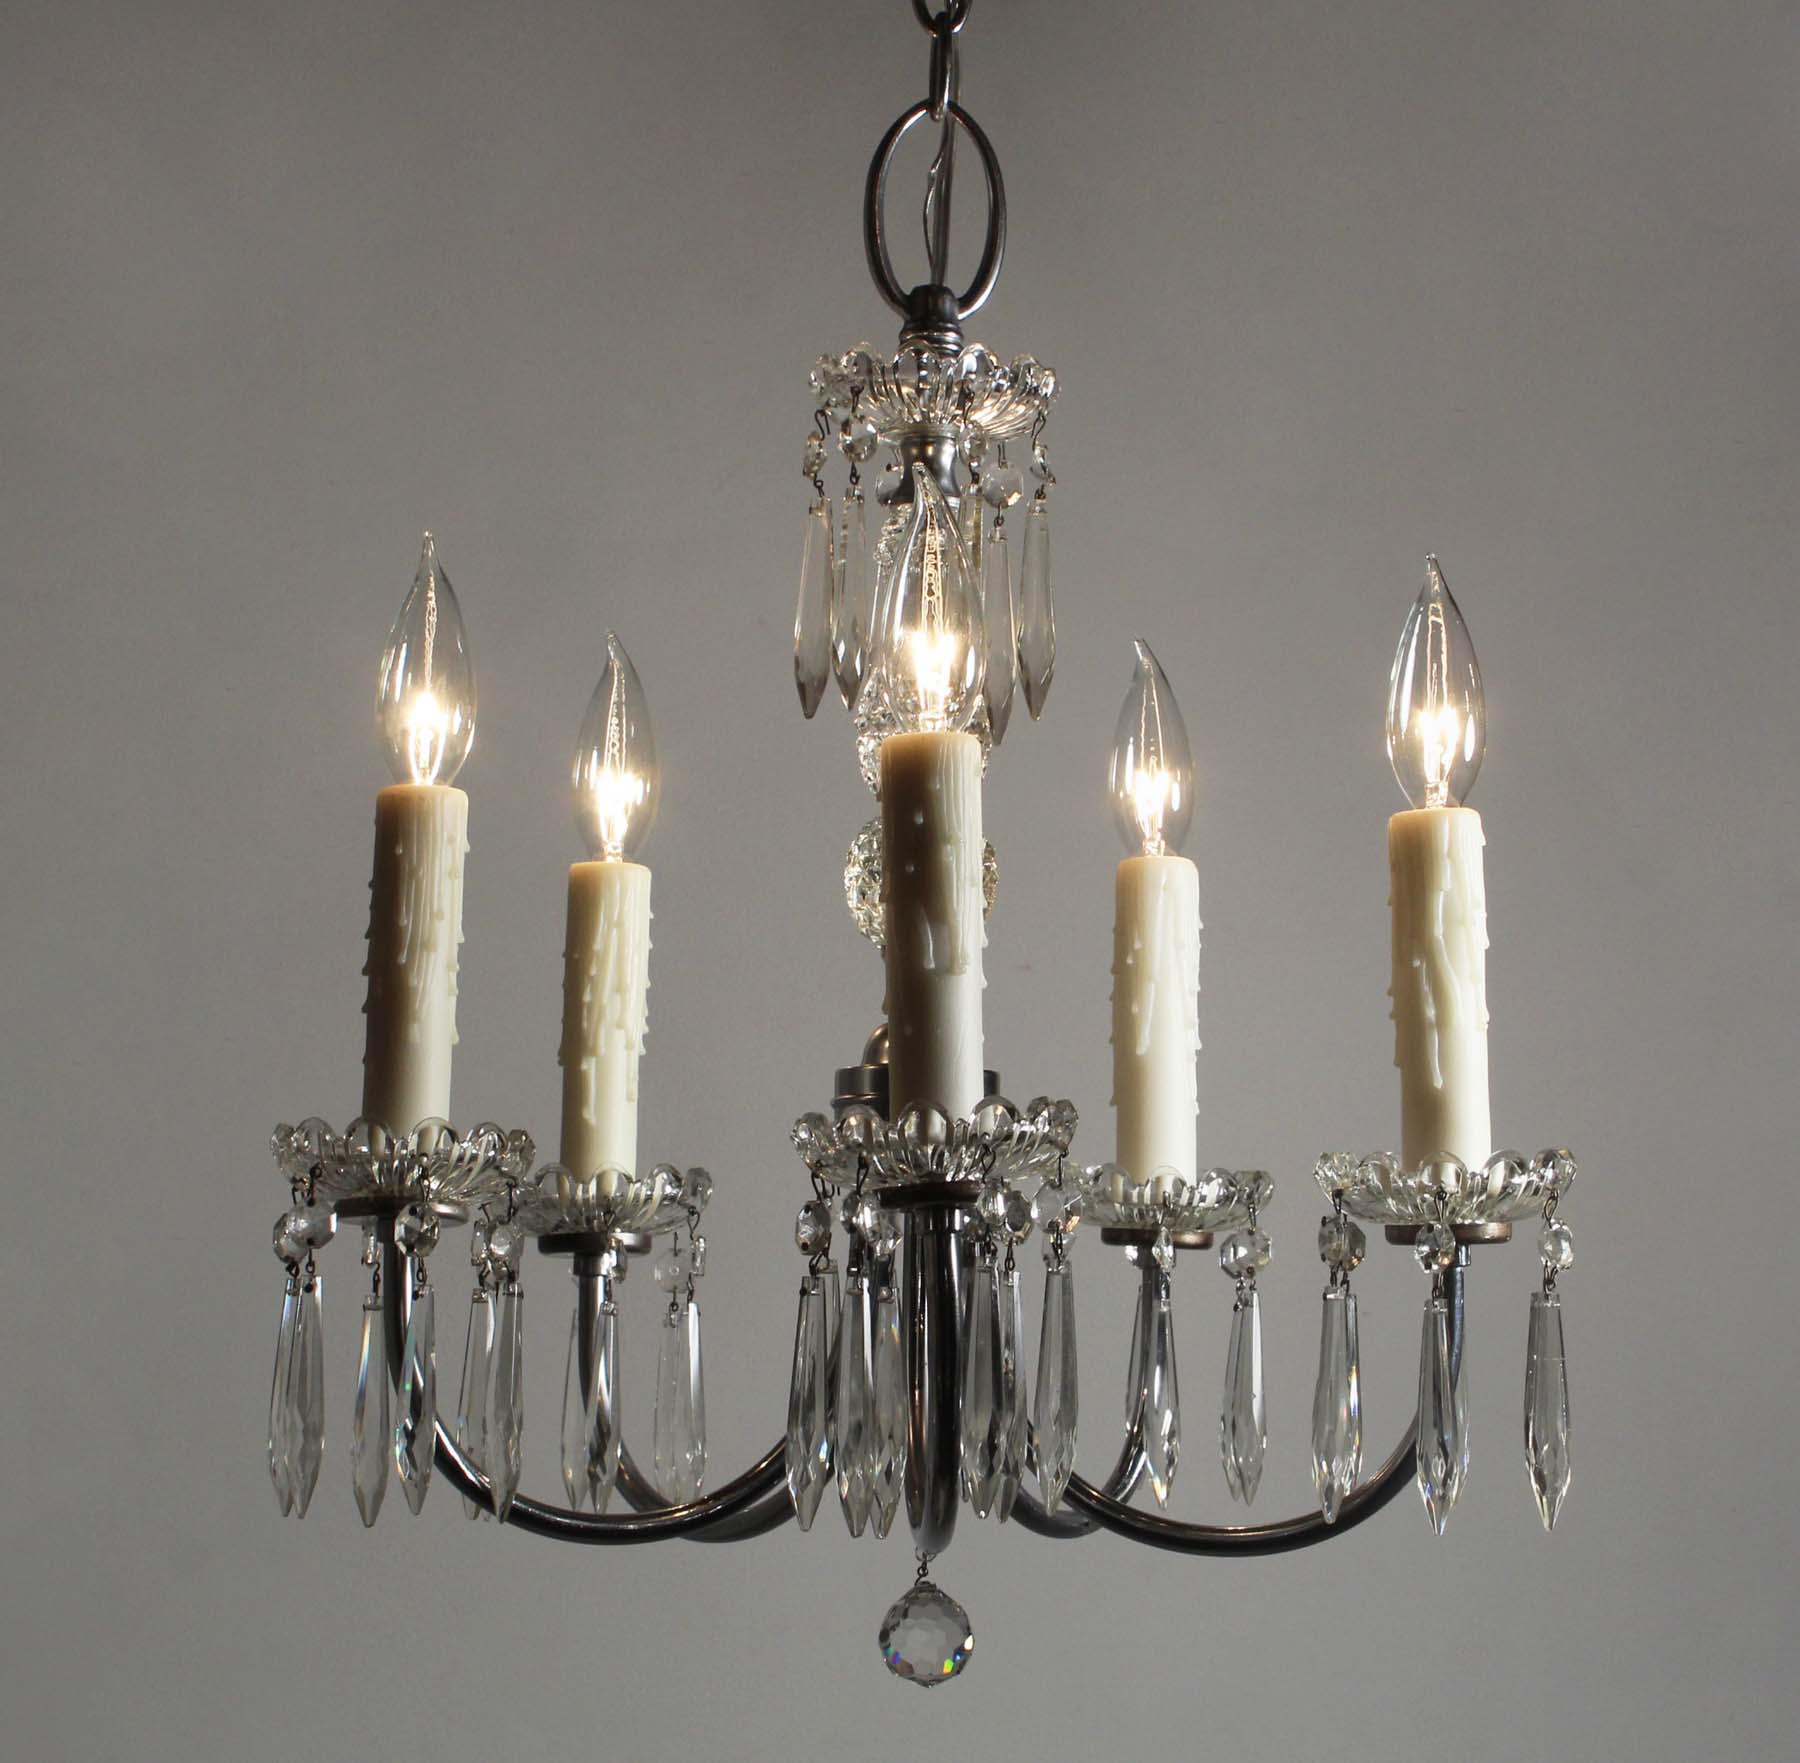 SOLD Antique Five-Light Chandelier with Prisms, Early 1900’s-68765